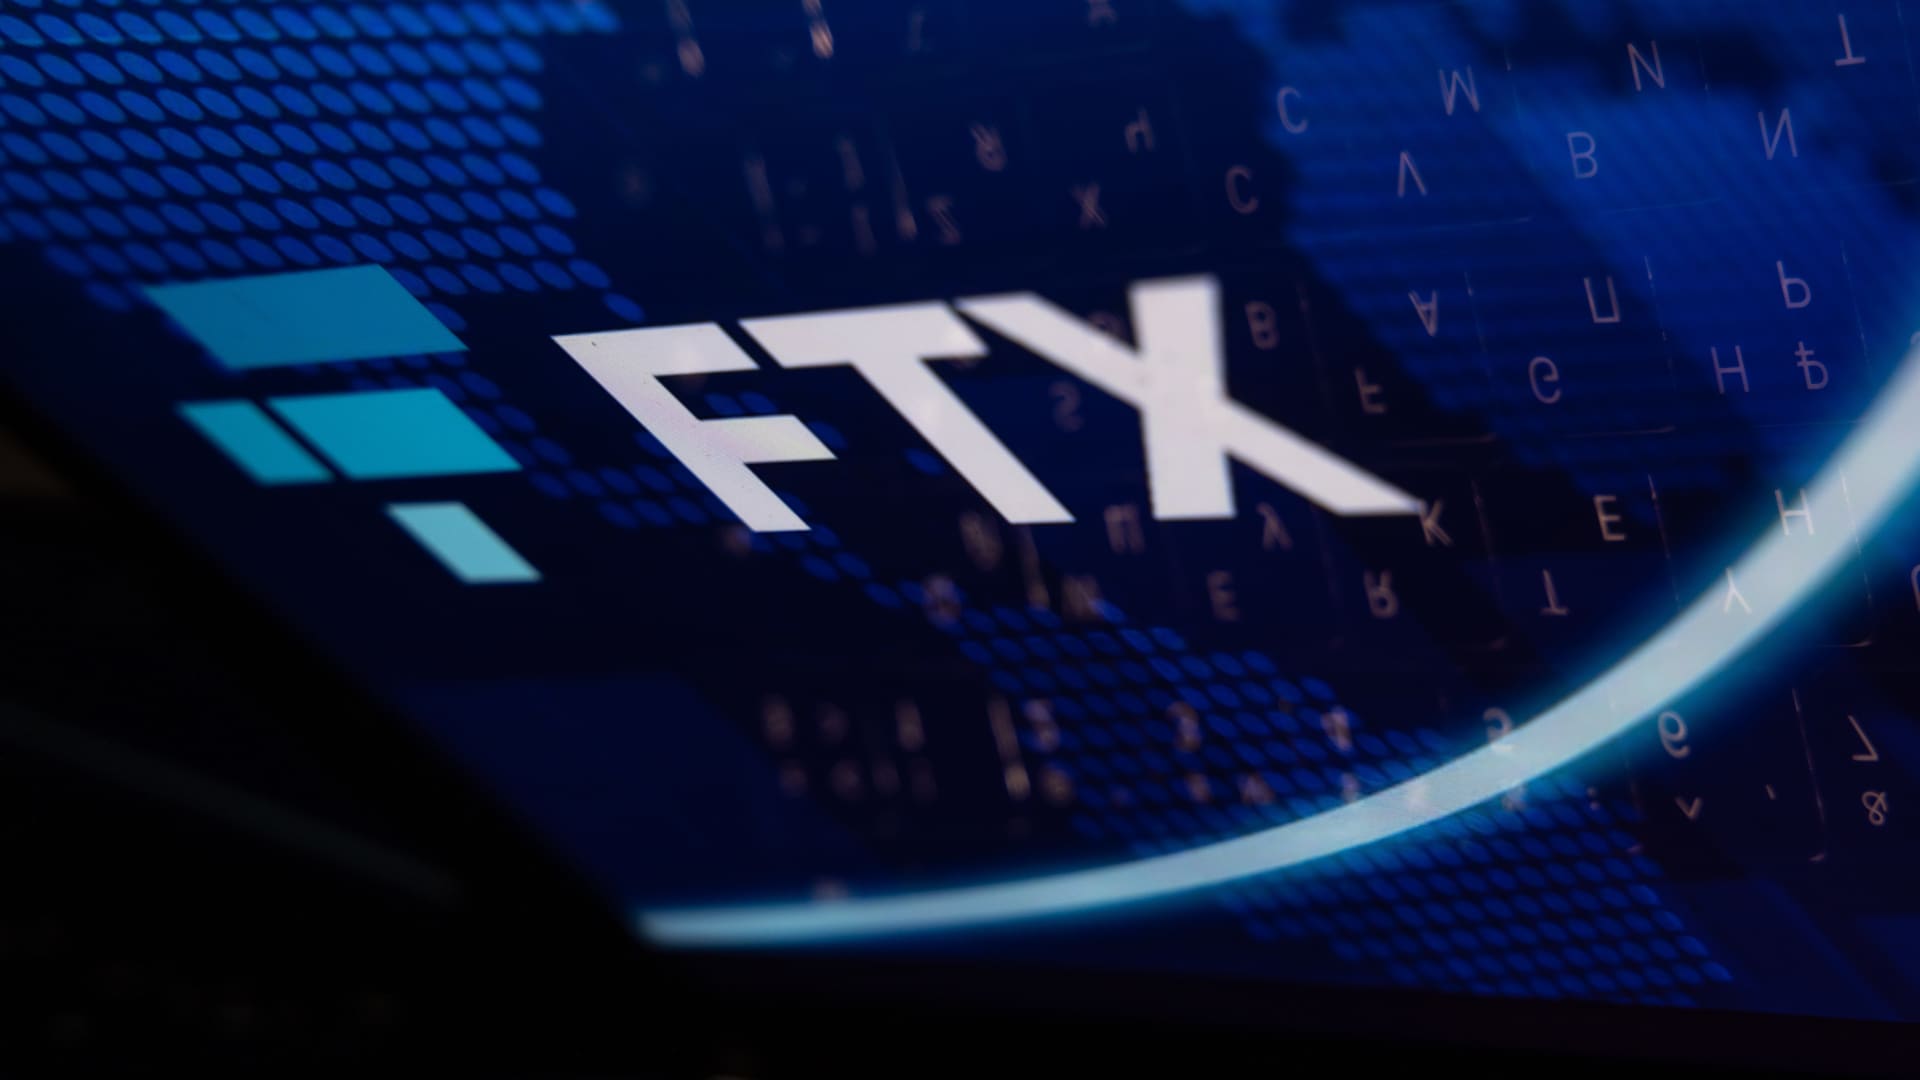 FTX's Japanese users will be able to start withdrawing funds from February